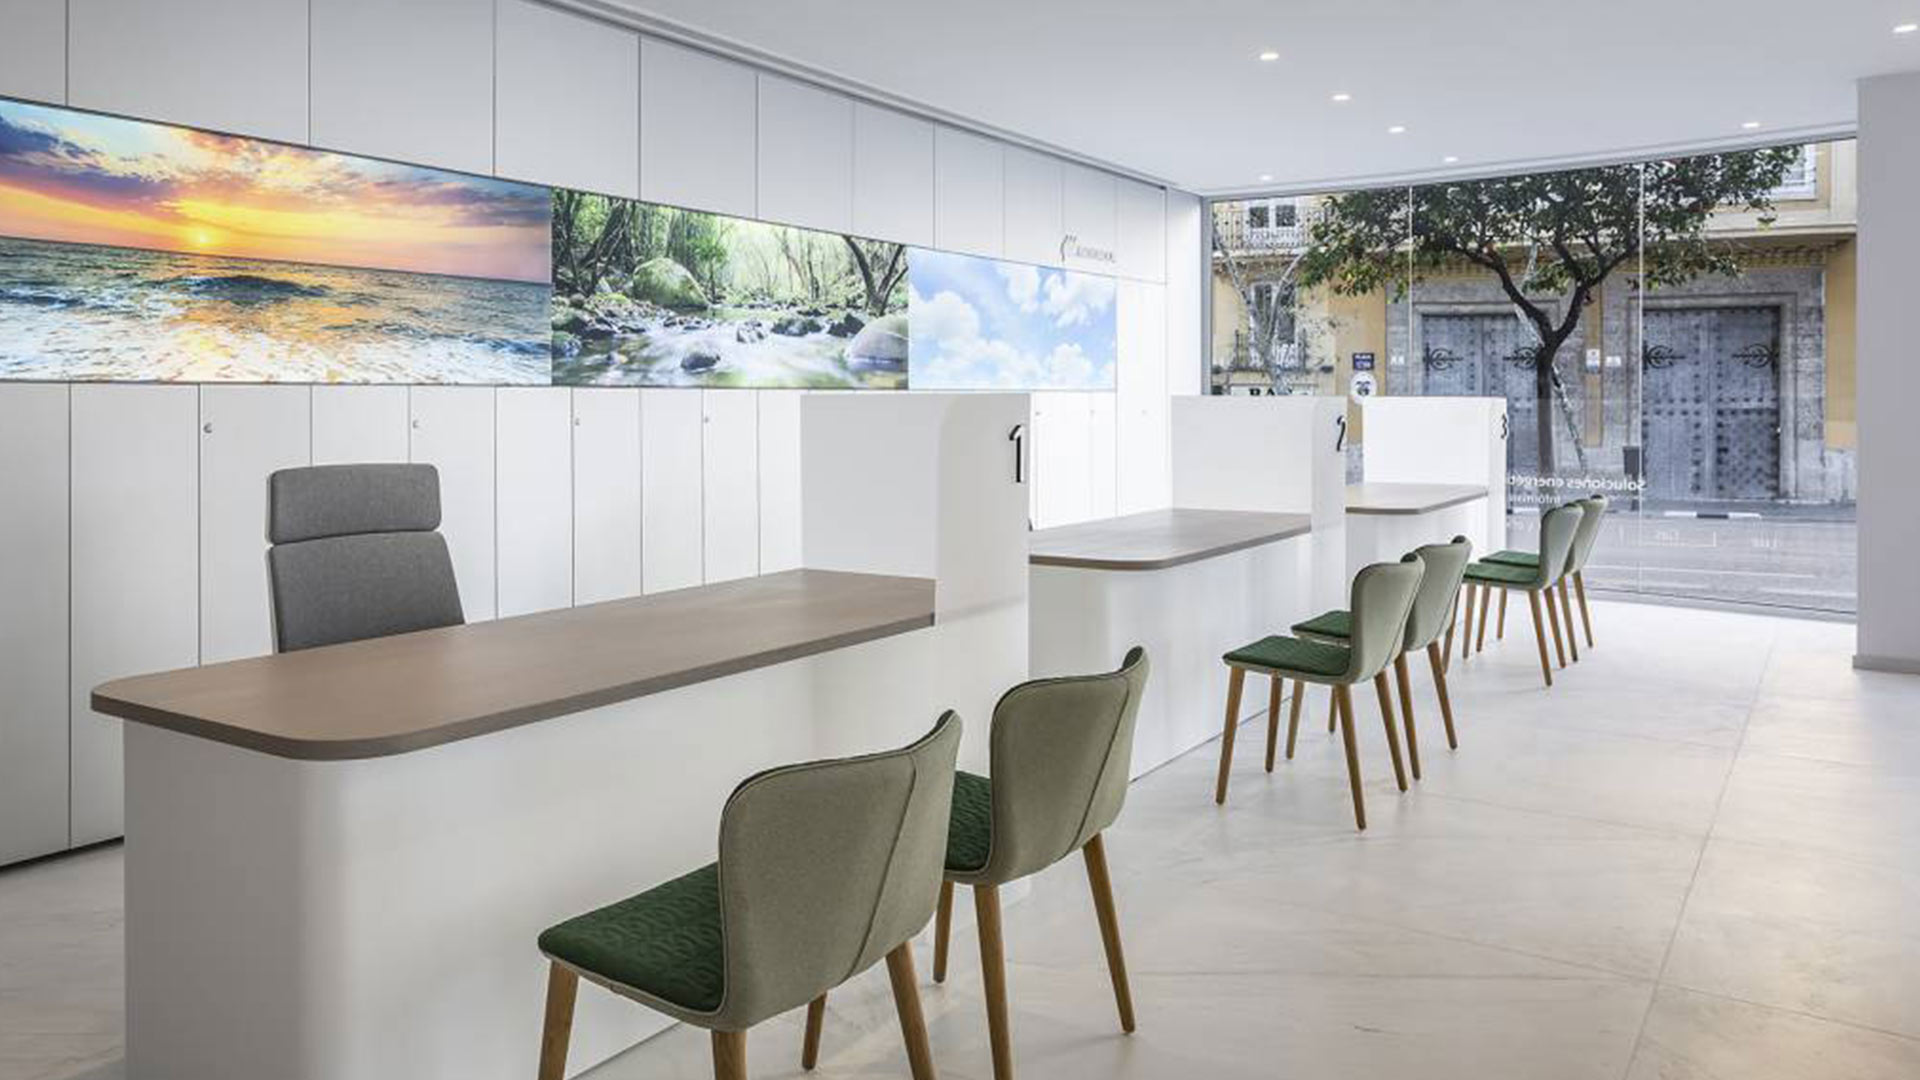 Project management and interior design of the Iberdrola offices